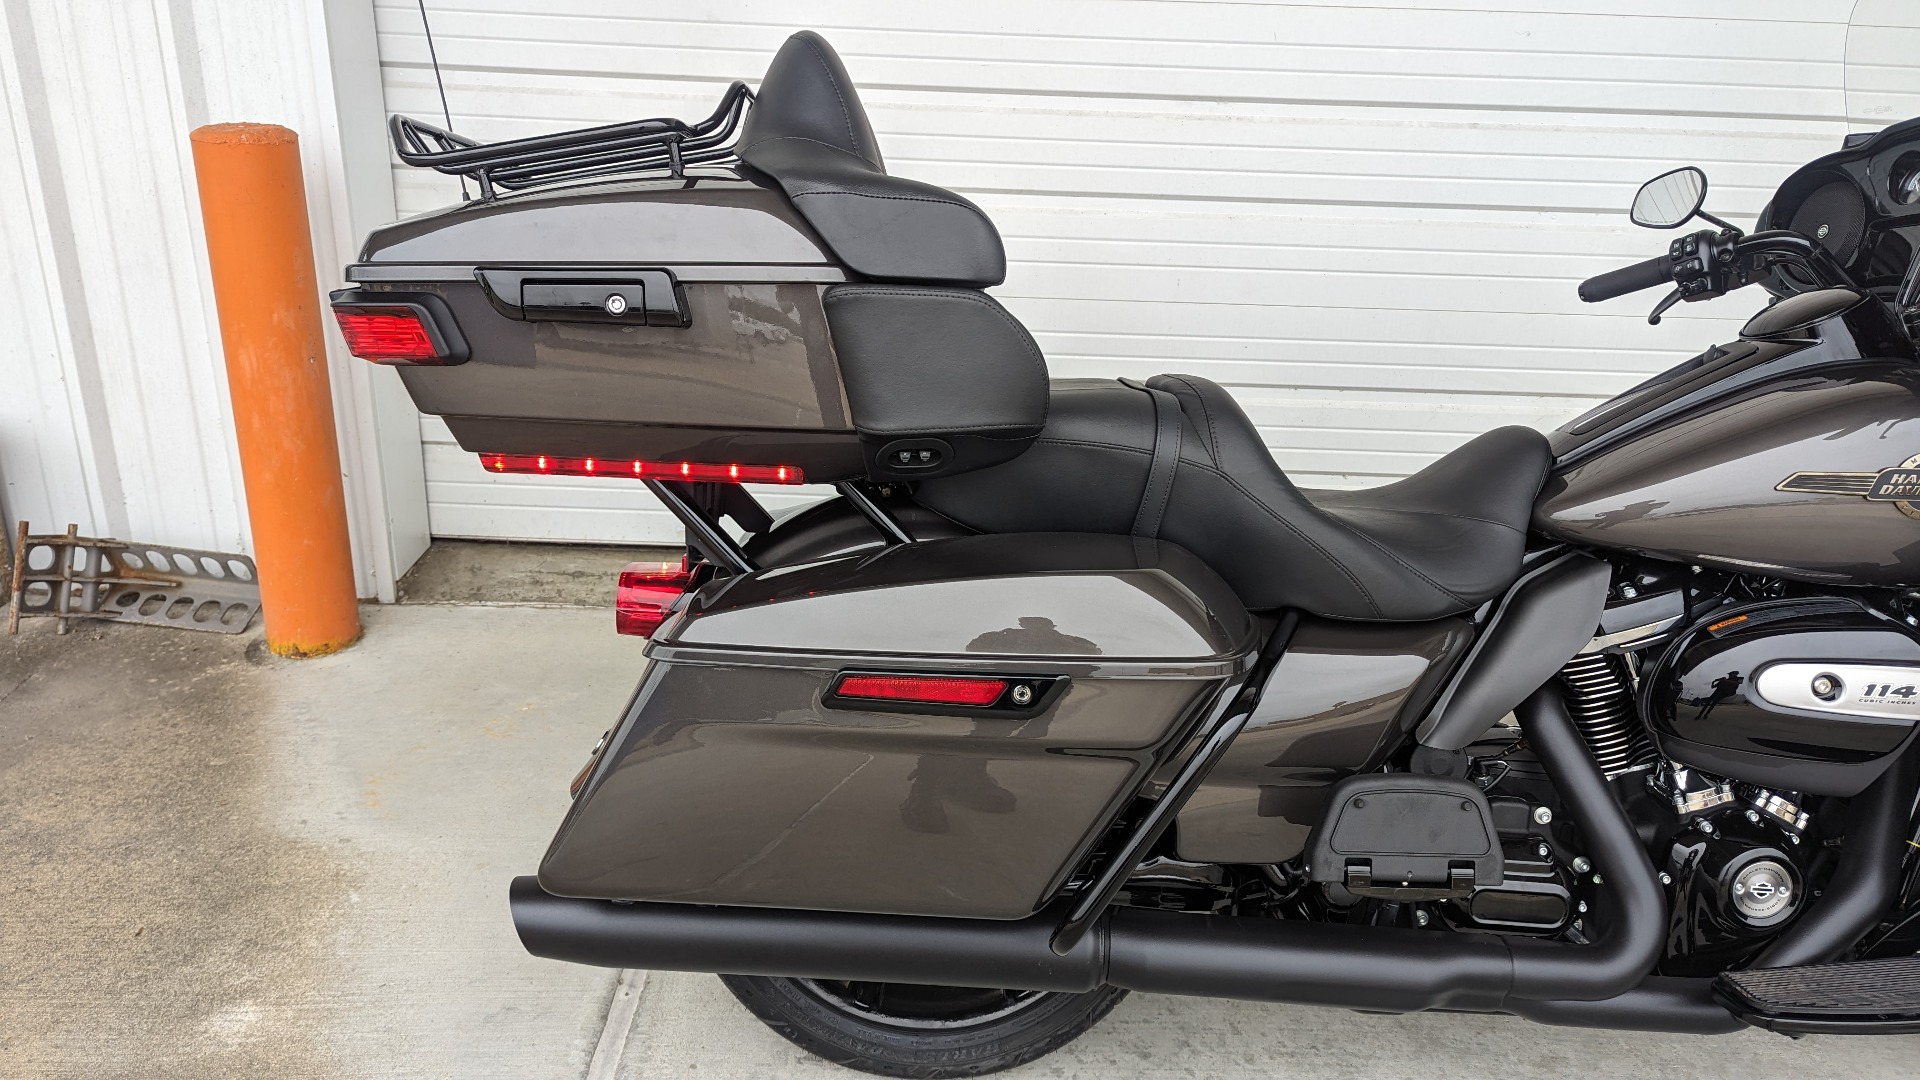 2023 harley davidson ultra limited for sale in arkansas - Photo 5